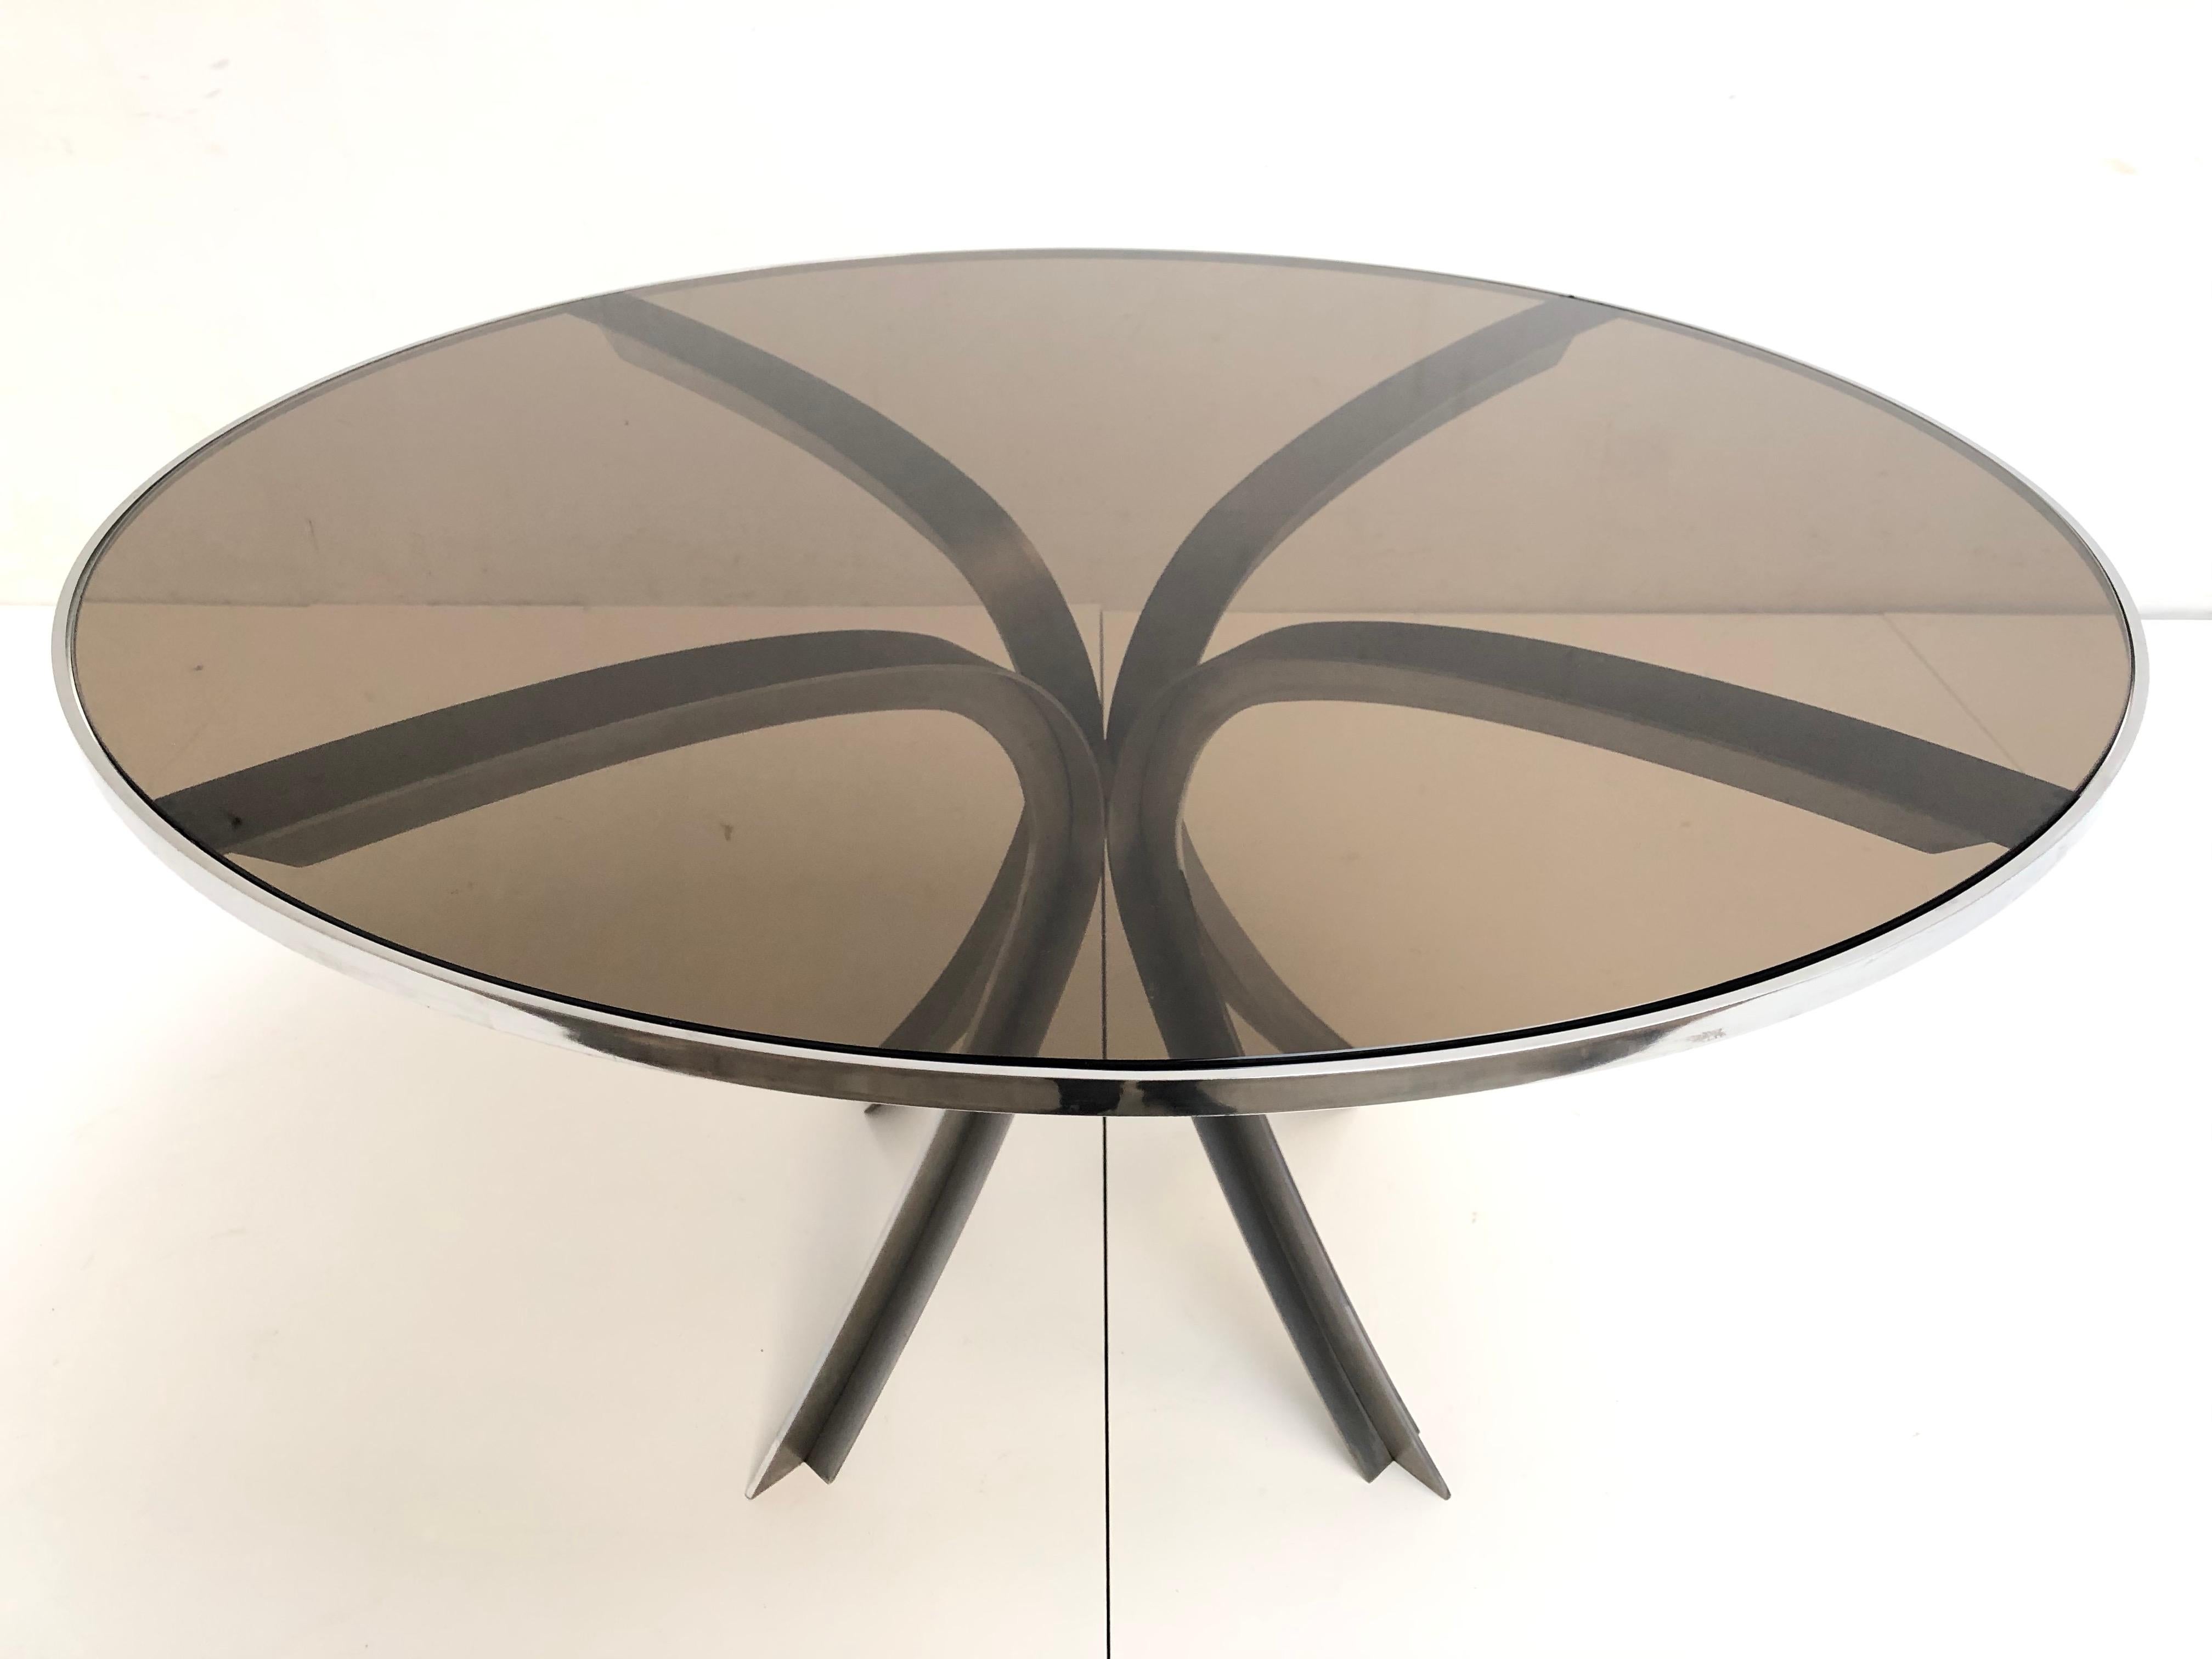 Sculptural Stainless Steel Smoked Glass Dining Table by Xavier Féal ...